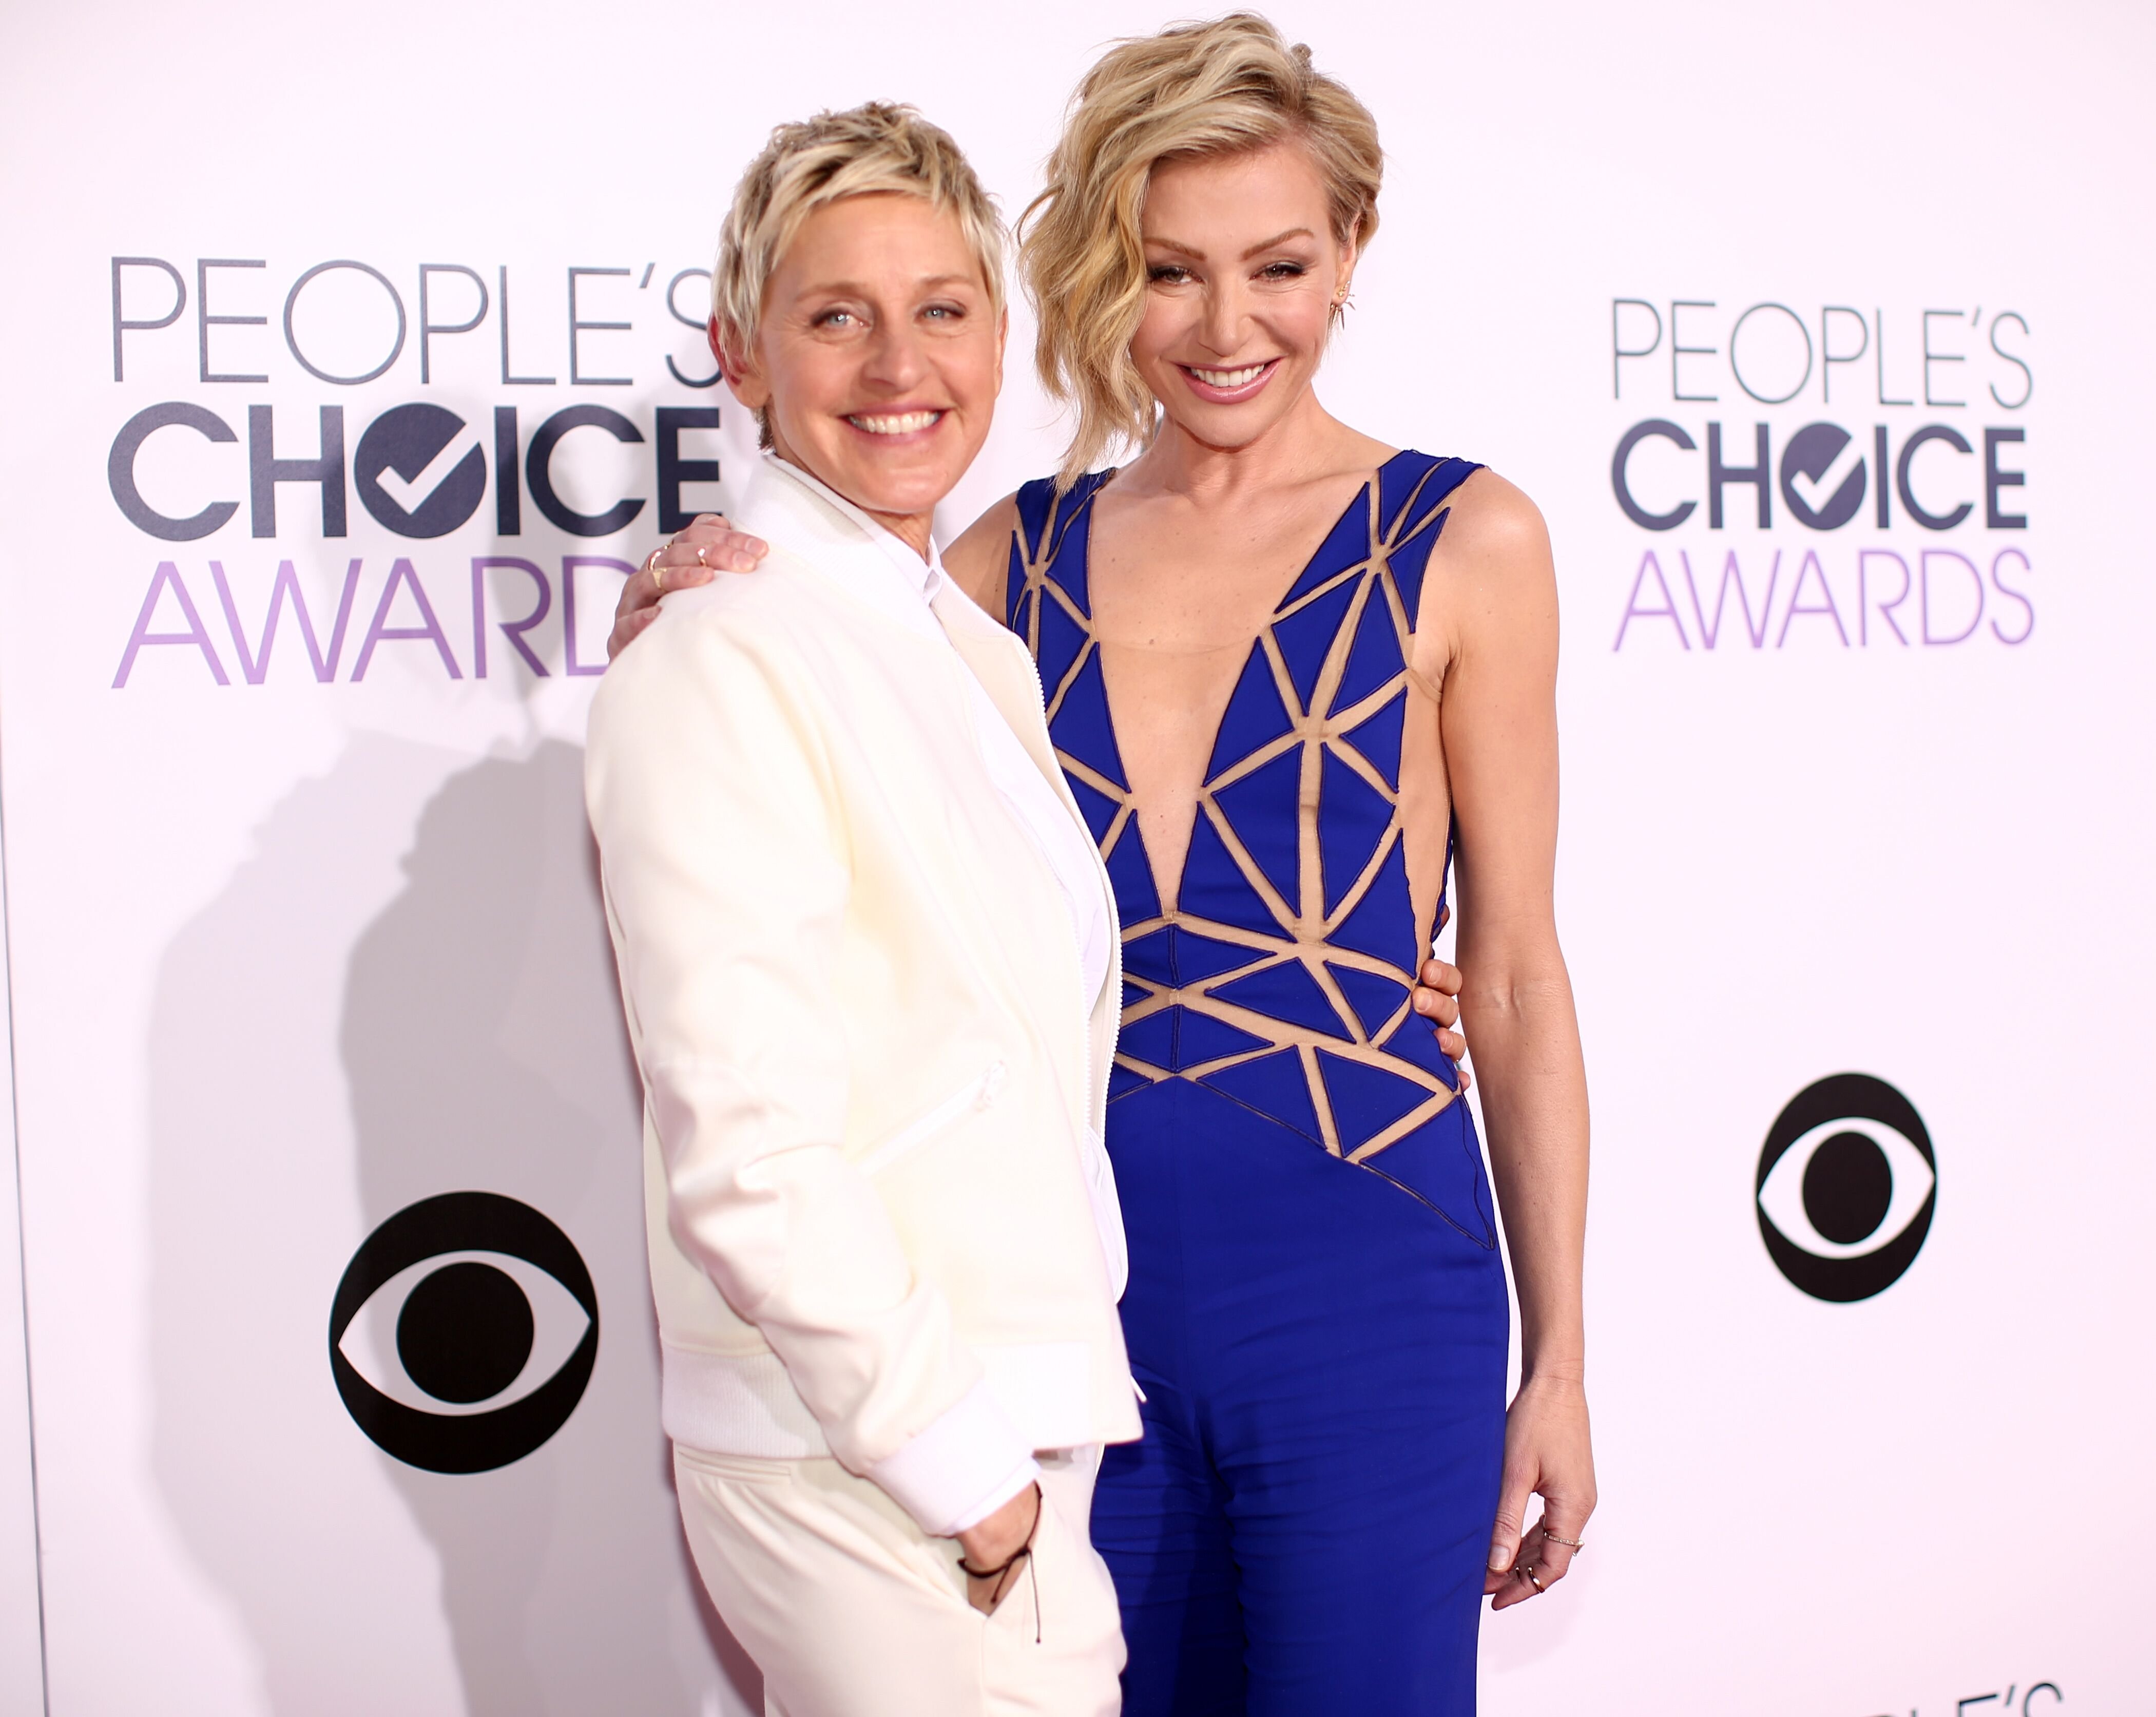 Ellen DeGeneres and actress Portia de Rossi attend The 41st Annual People's Choice Awards. | Source: Getty Images 